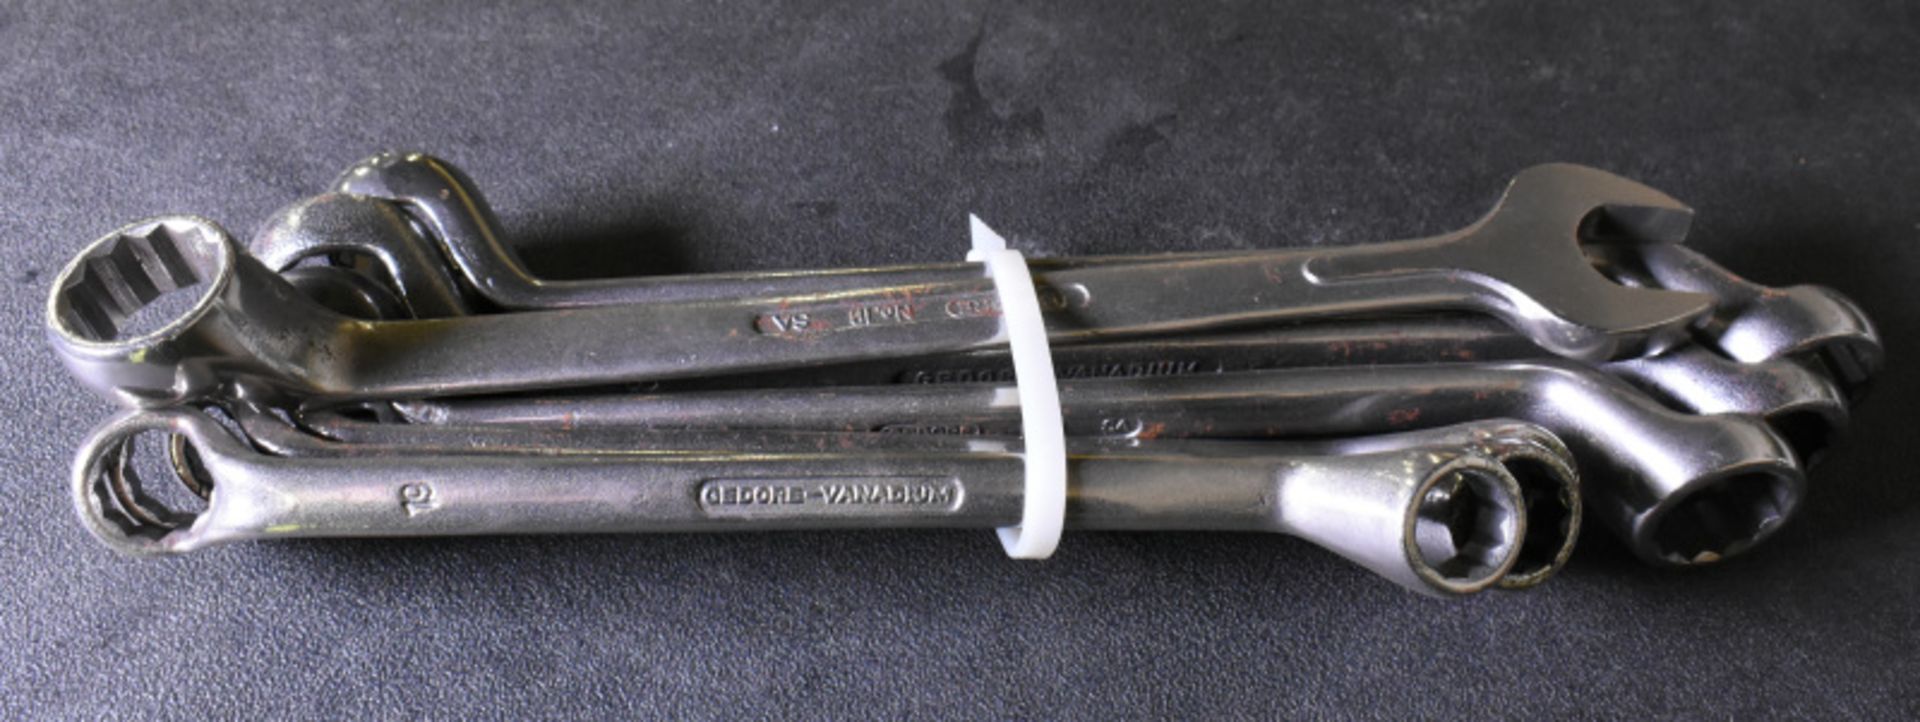 Ring spanners - Image 2 of 2